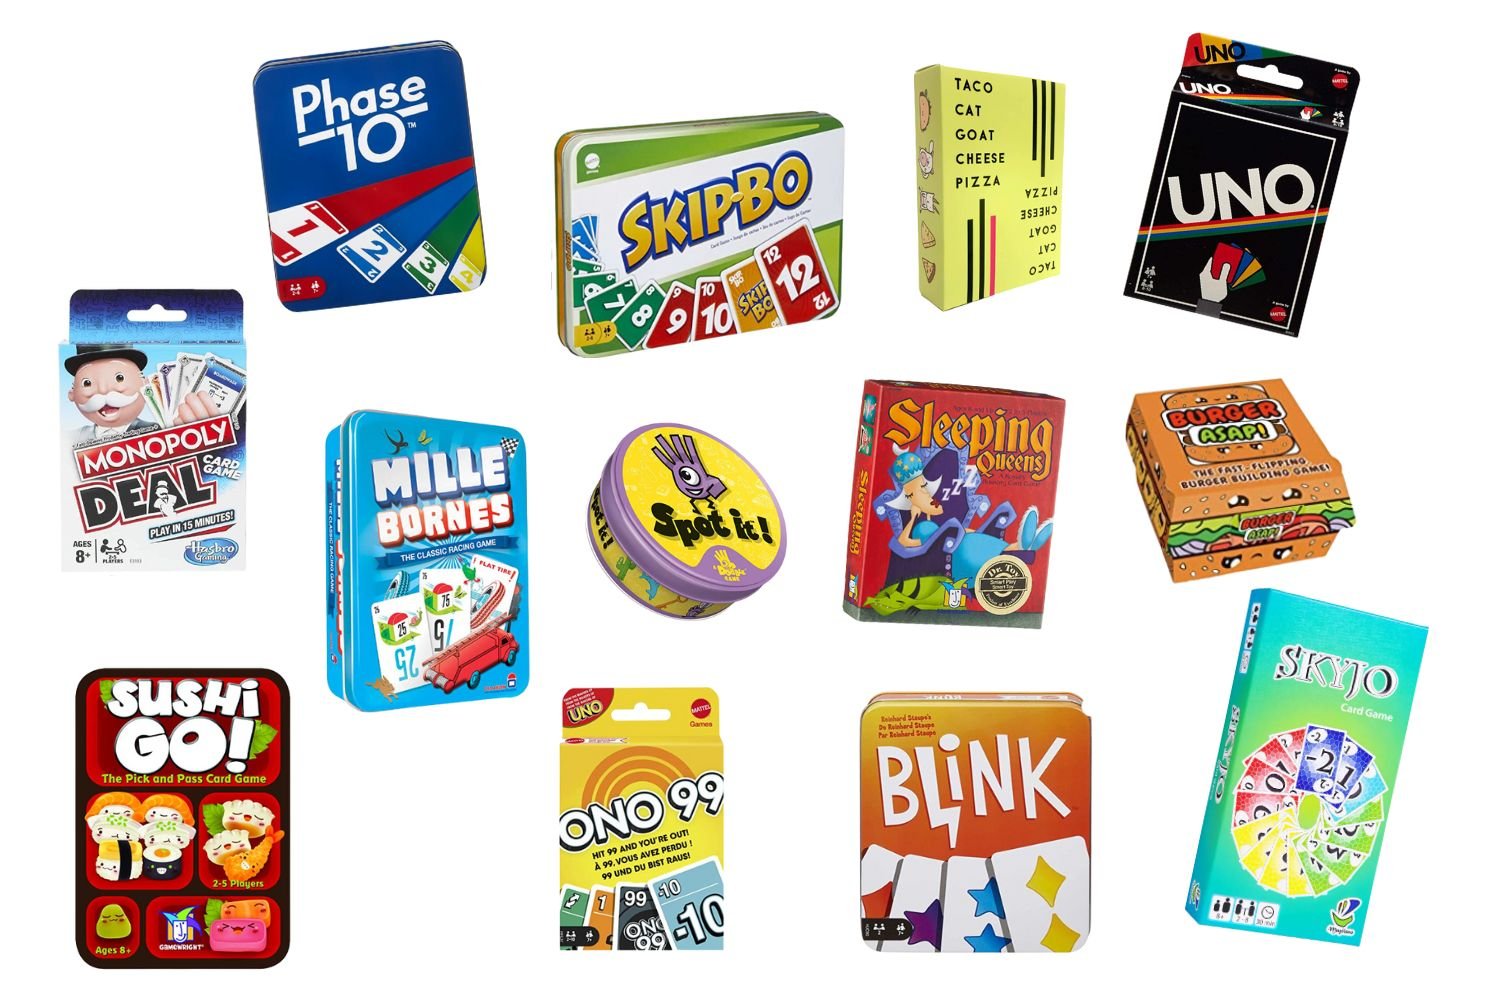 Mattel 3 Card Games, UNO, Phase 10, ONO 99, For All Ages, Travel